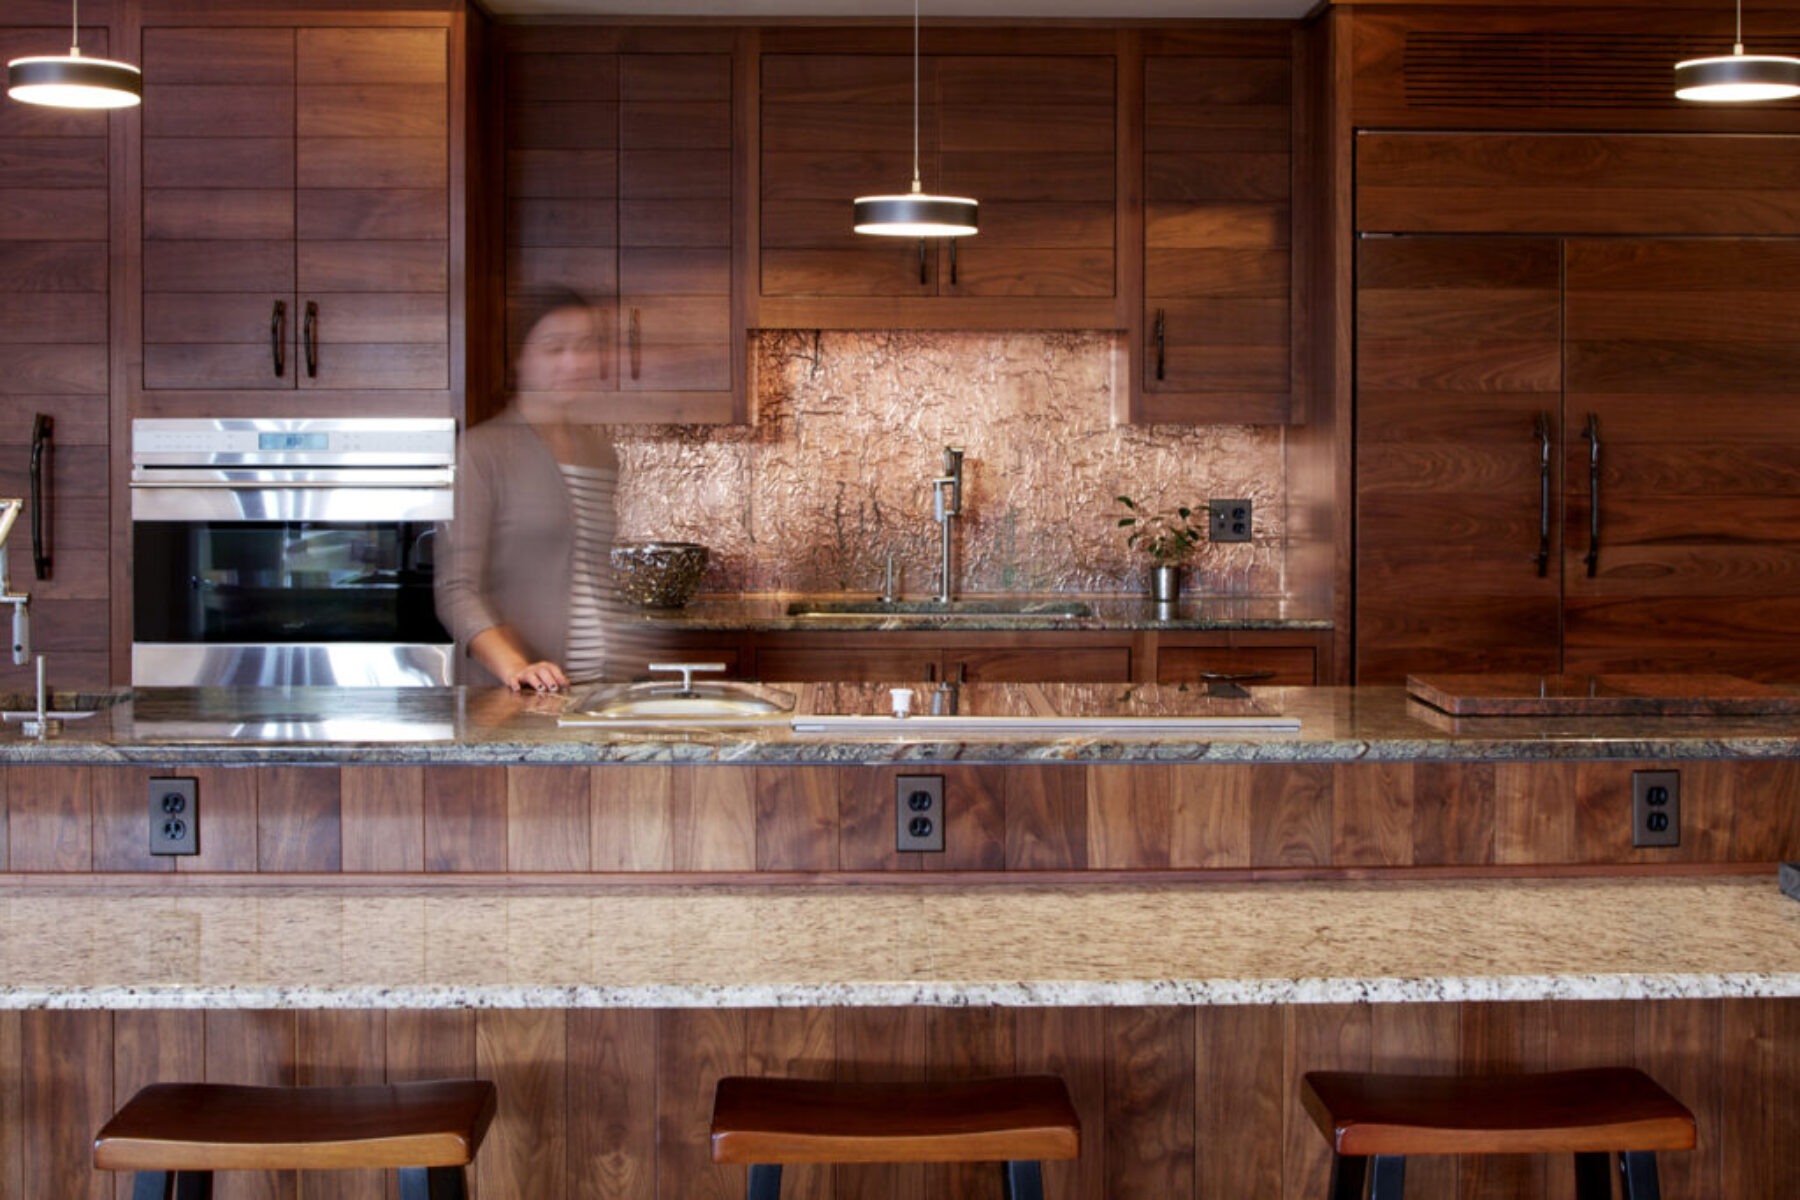 A kitchen with wooden cupboards and granite countertops